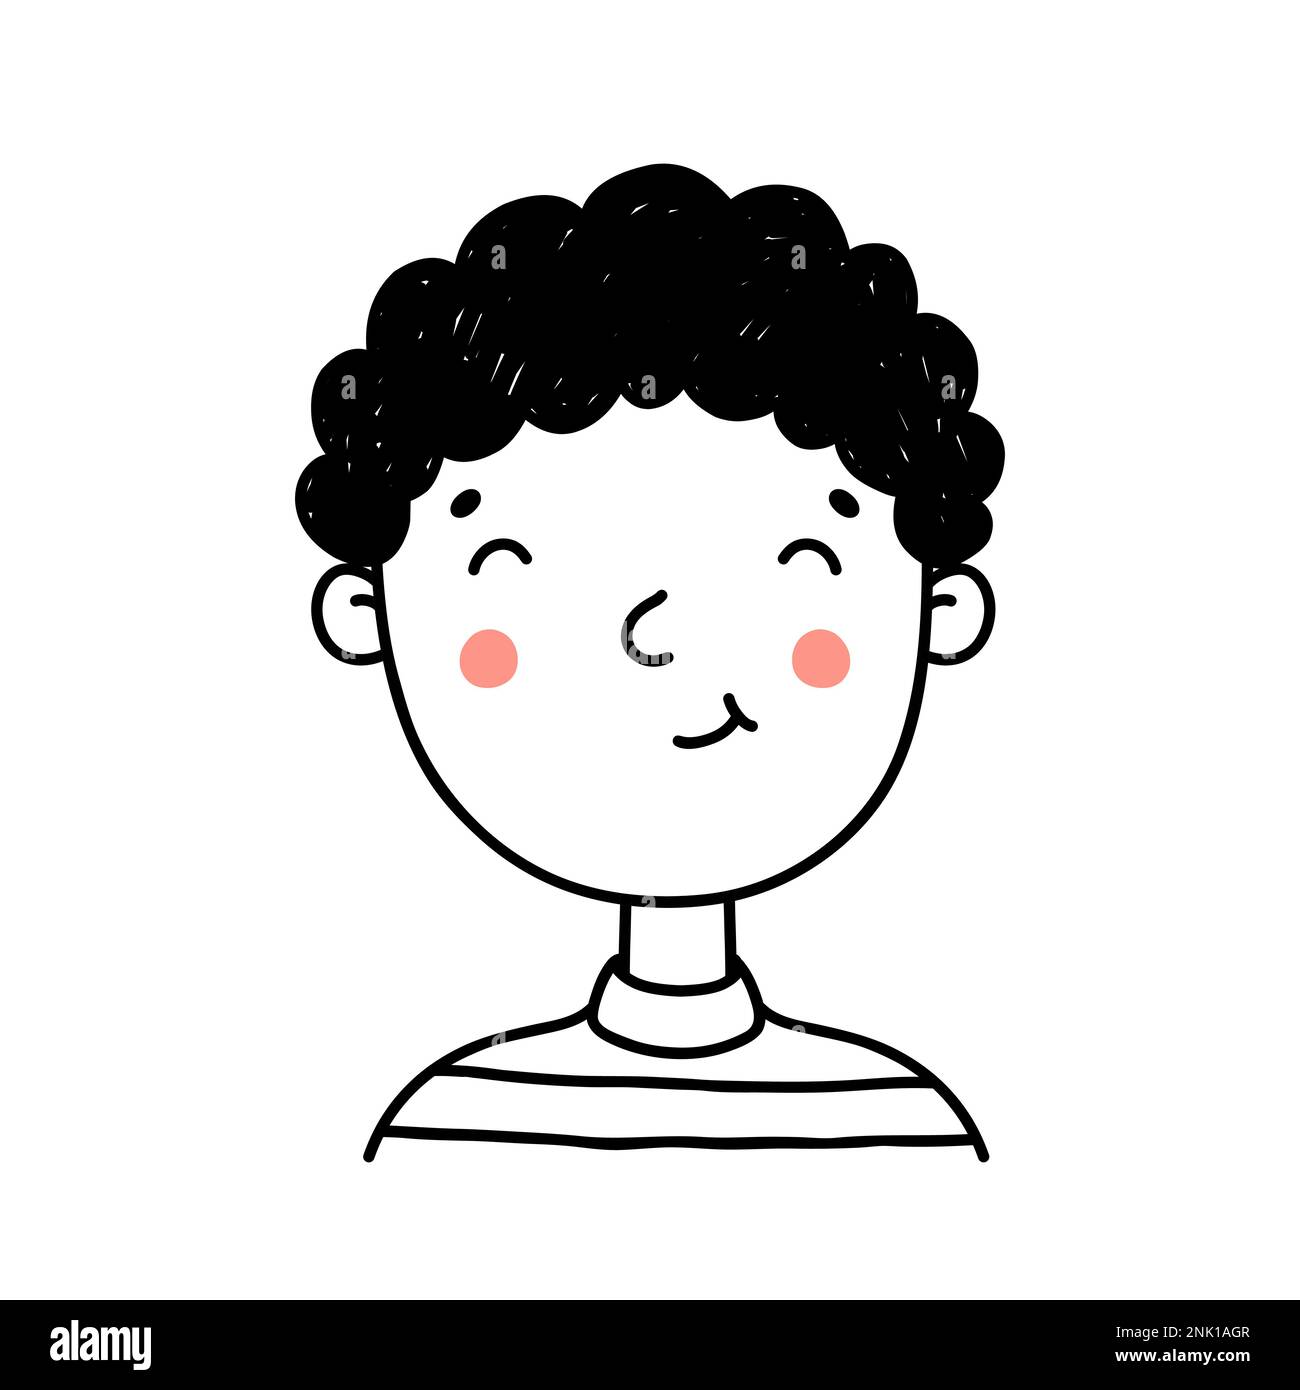 Cute portrait of happy young boy isolated on white background. Cartoon character. Vector hand-drawn illustration in doodle style. Perfect for social media, avatars, logo, various designs. Stock Vector